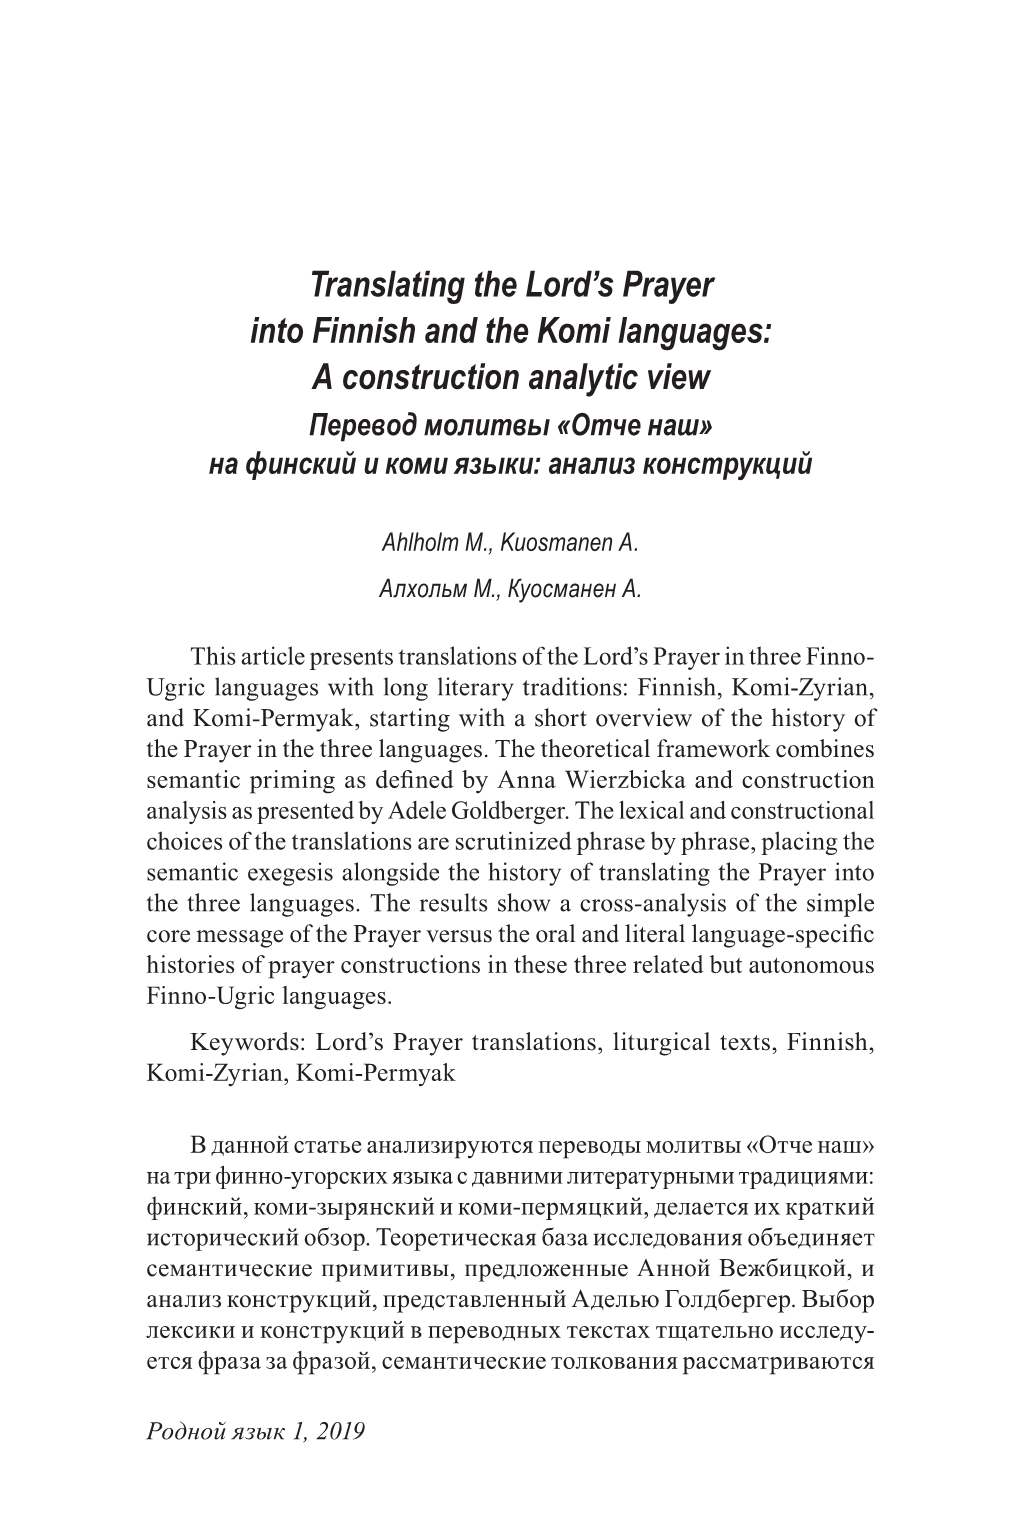 Translating the Lord's Prayer Into Finnish and the Komi Languages: A